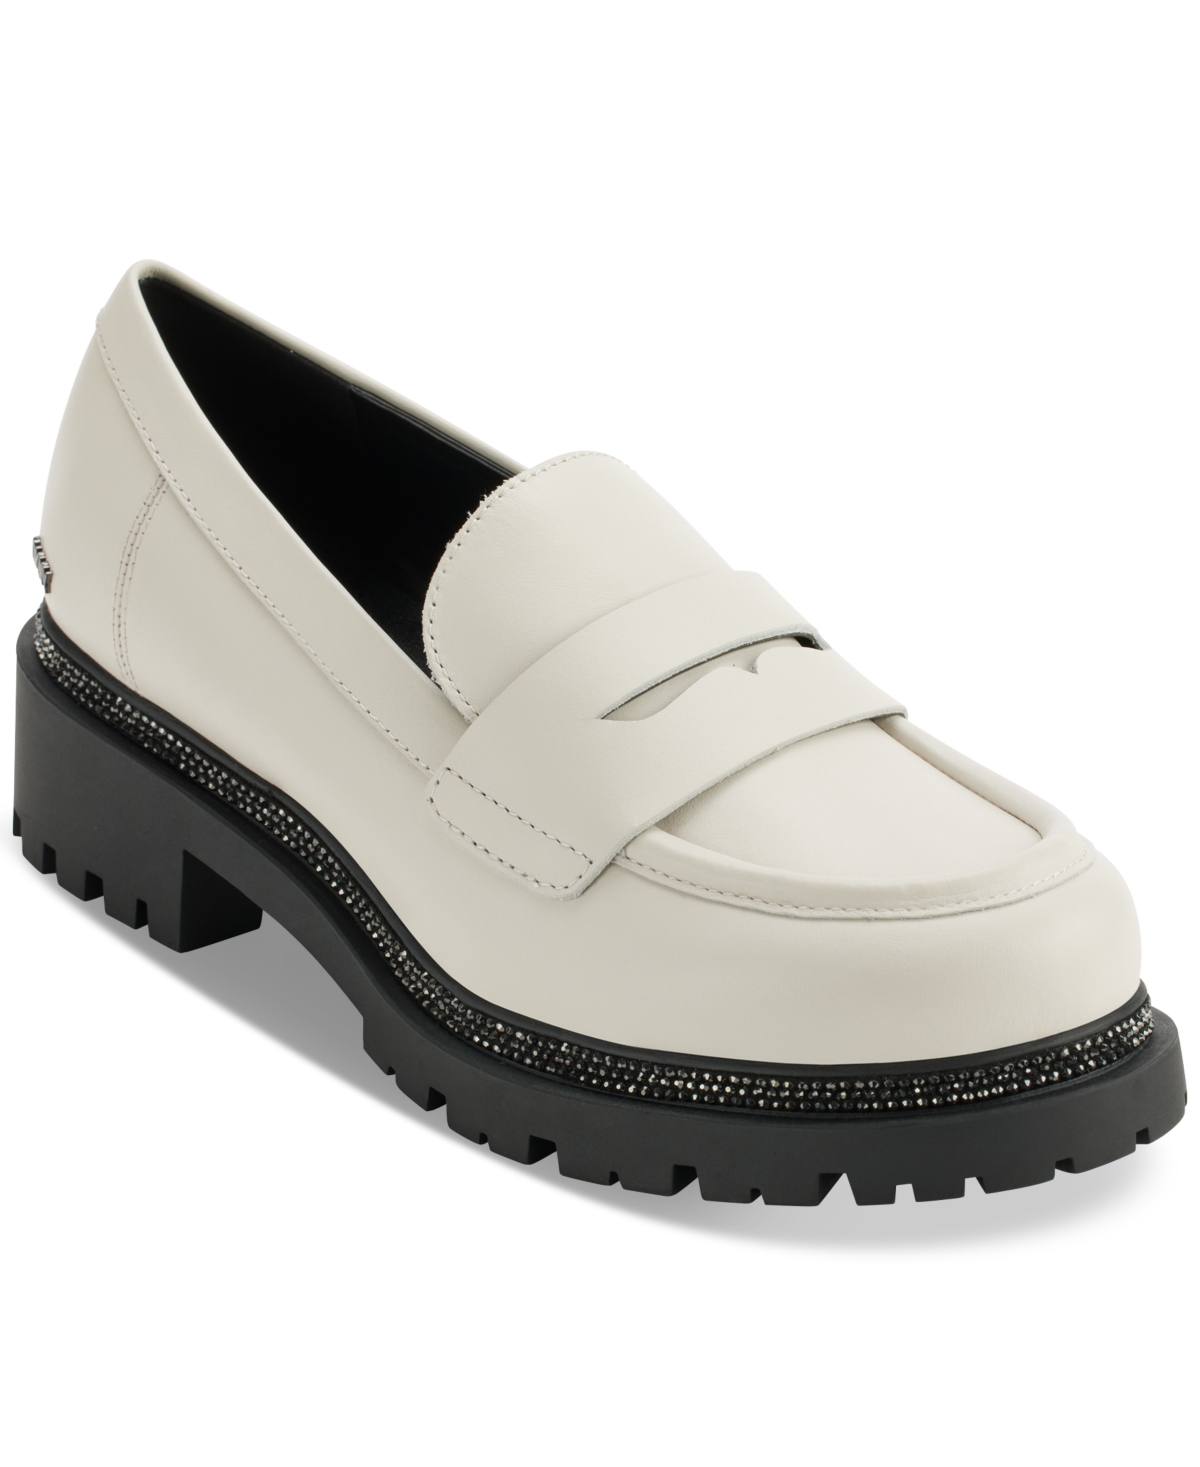 Shop Dkny Women's Rudy Slip-on Penny Loafer Flats In Pebble